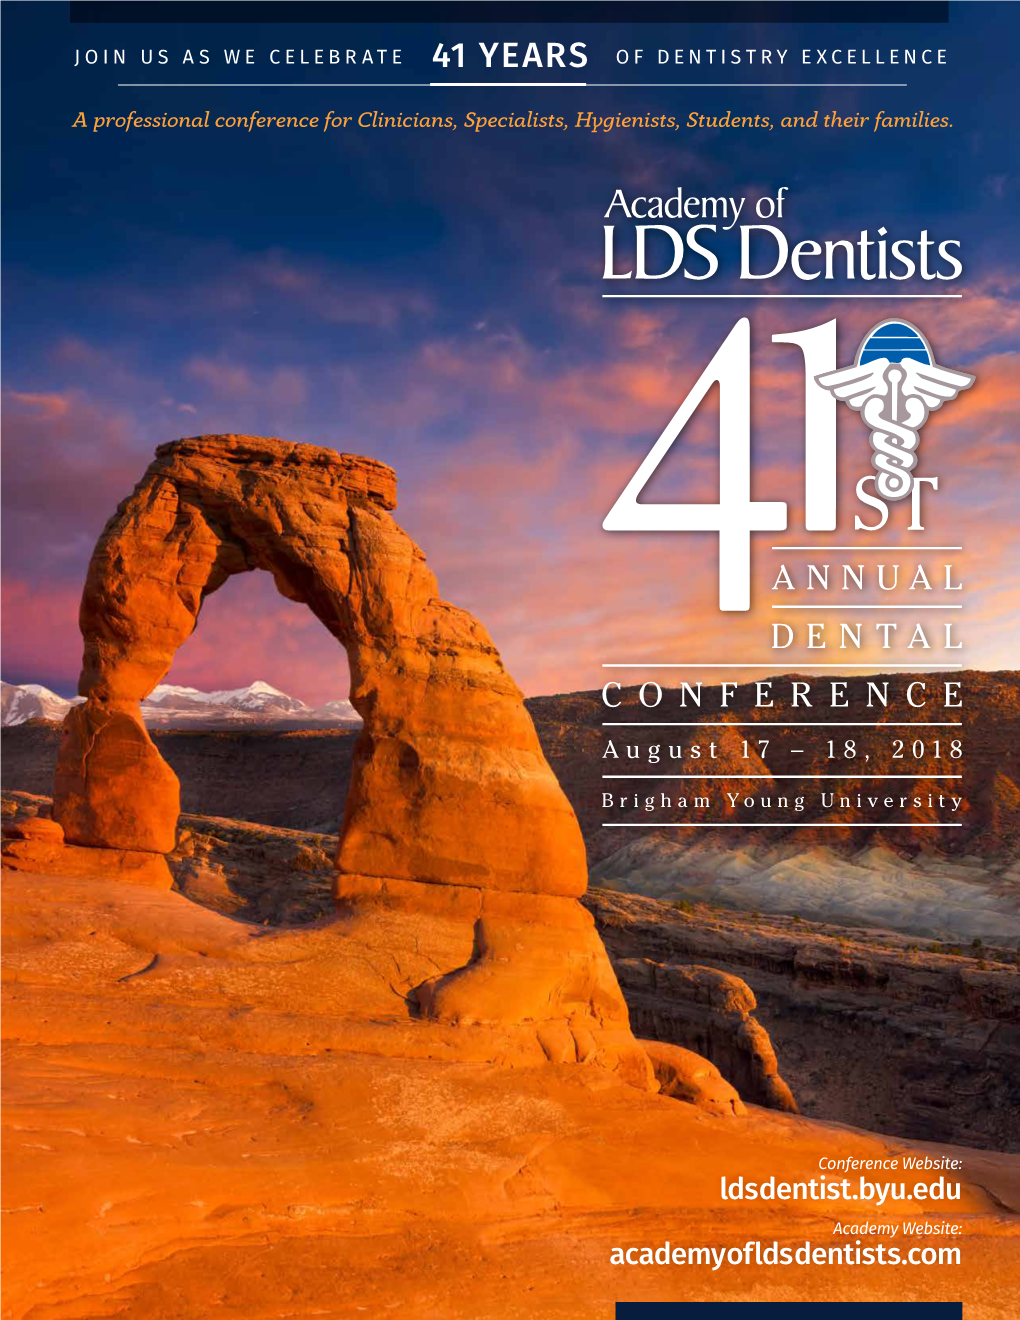 41St Annual Conference Take a Break from Professional Learning to Be Spiritually Uplifted and Edified, of the Academy of LDS Dentists, Nourishing Both Body and Spirit